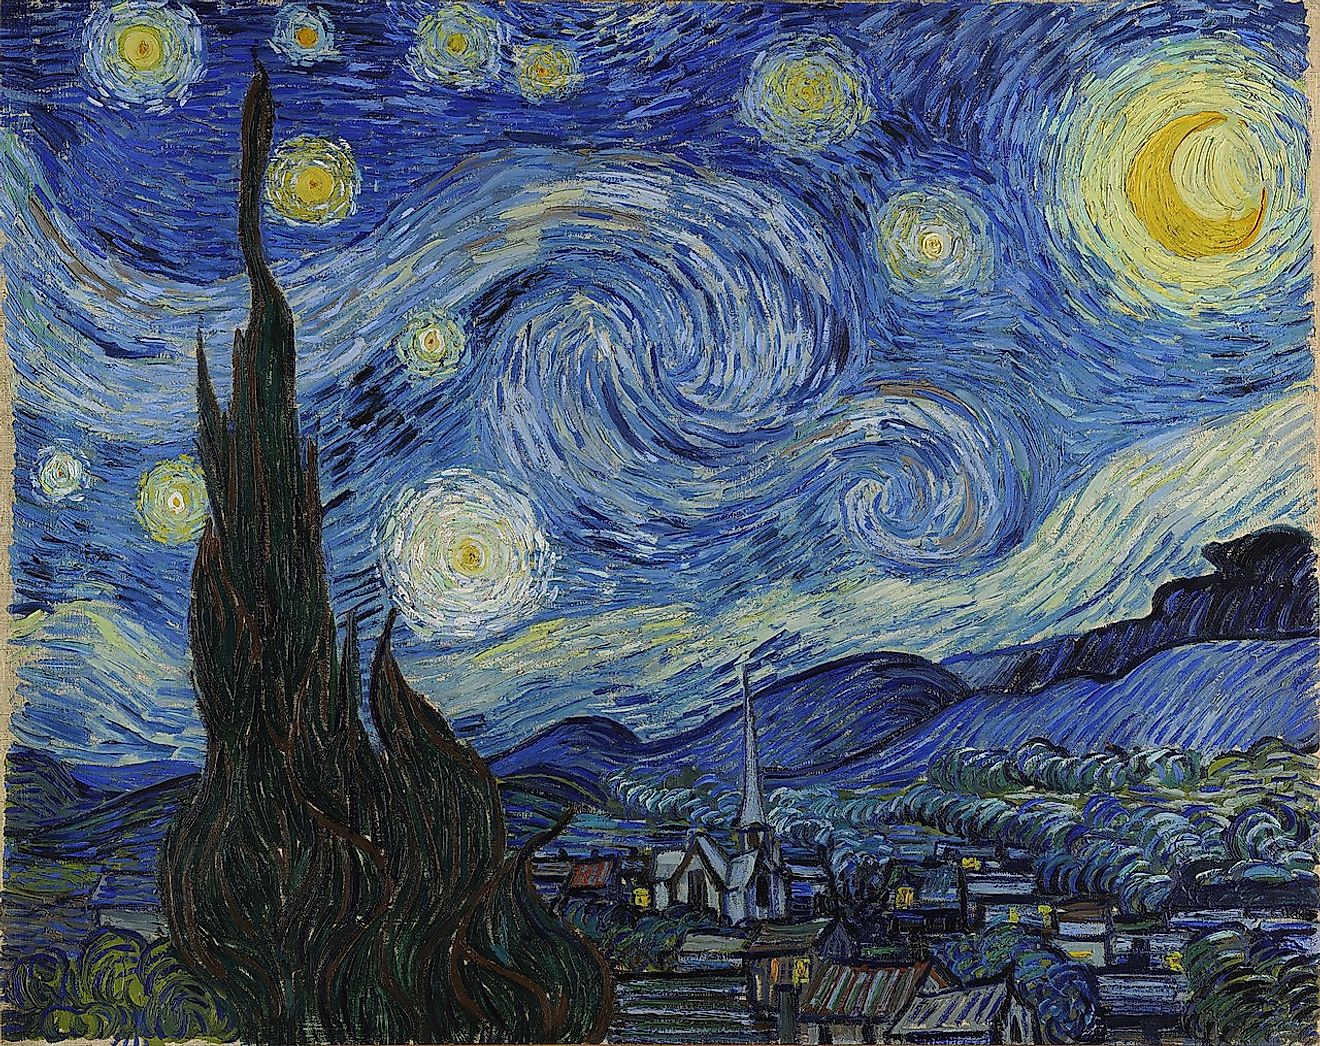 The Starry Night, a famous painting by Vincent Van Gogh. 